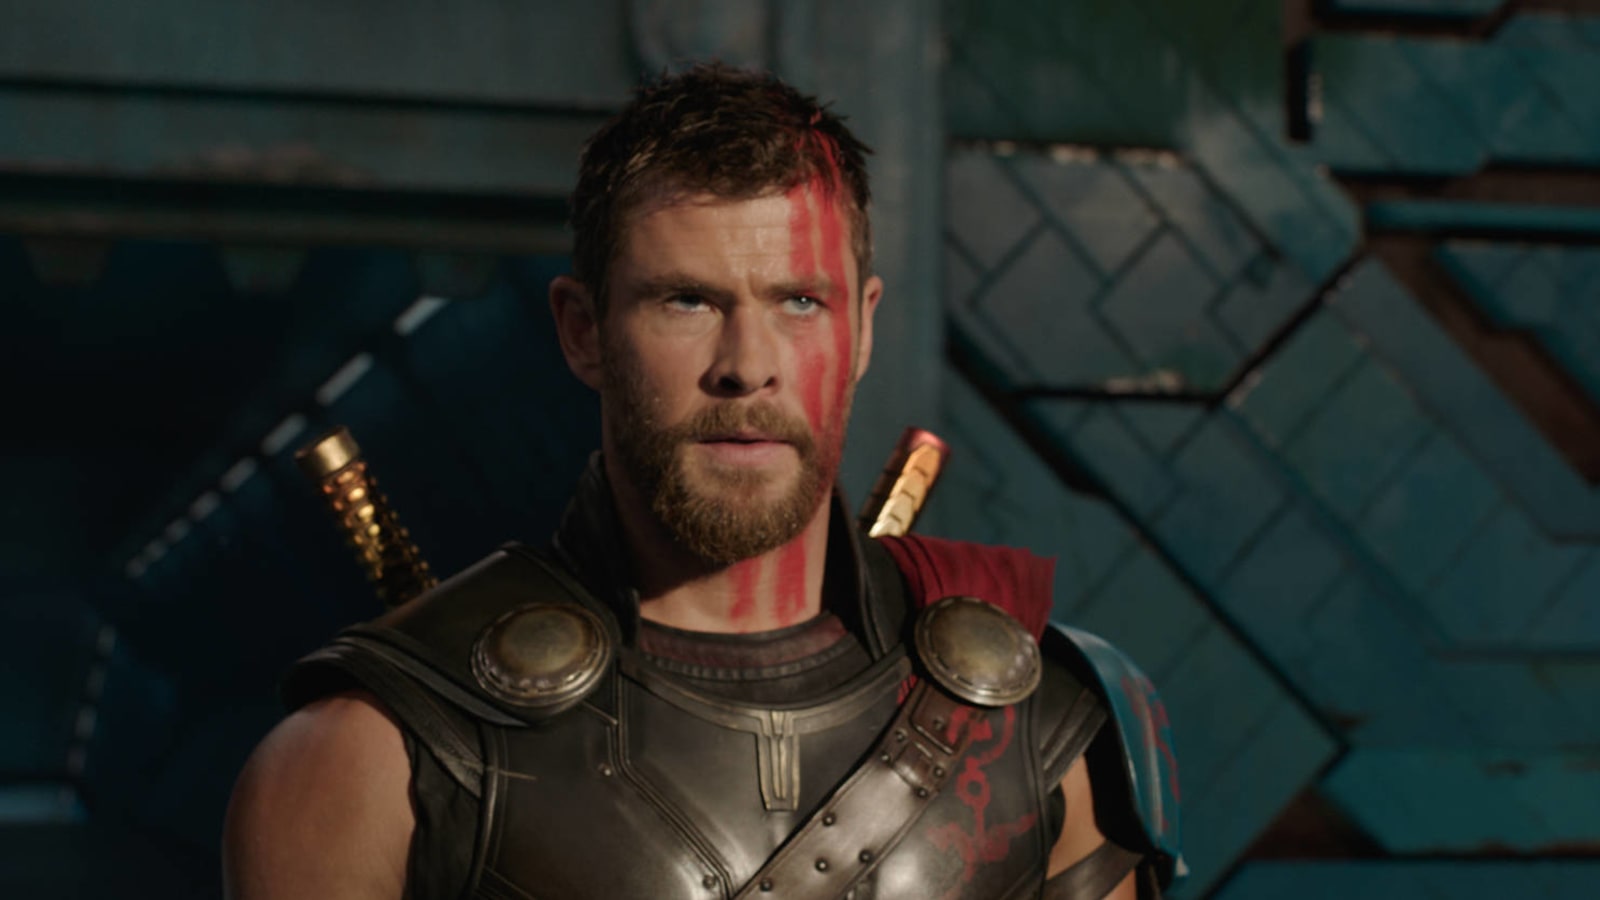 Chris Hemsworth confirms 'Thor: Love and Thunder' is complete: 'That's a wrap'